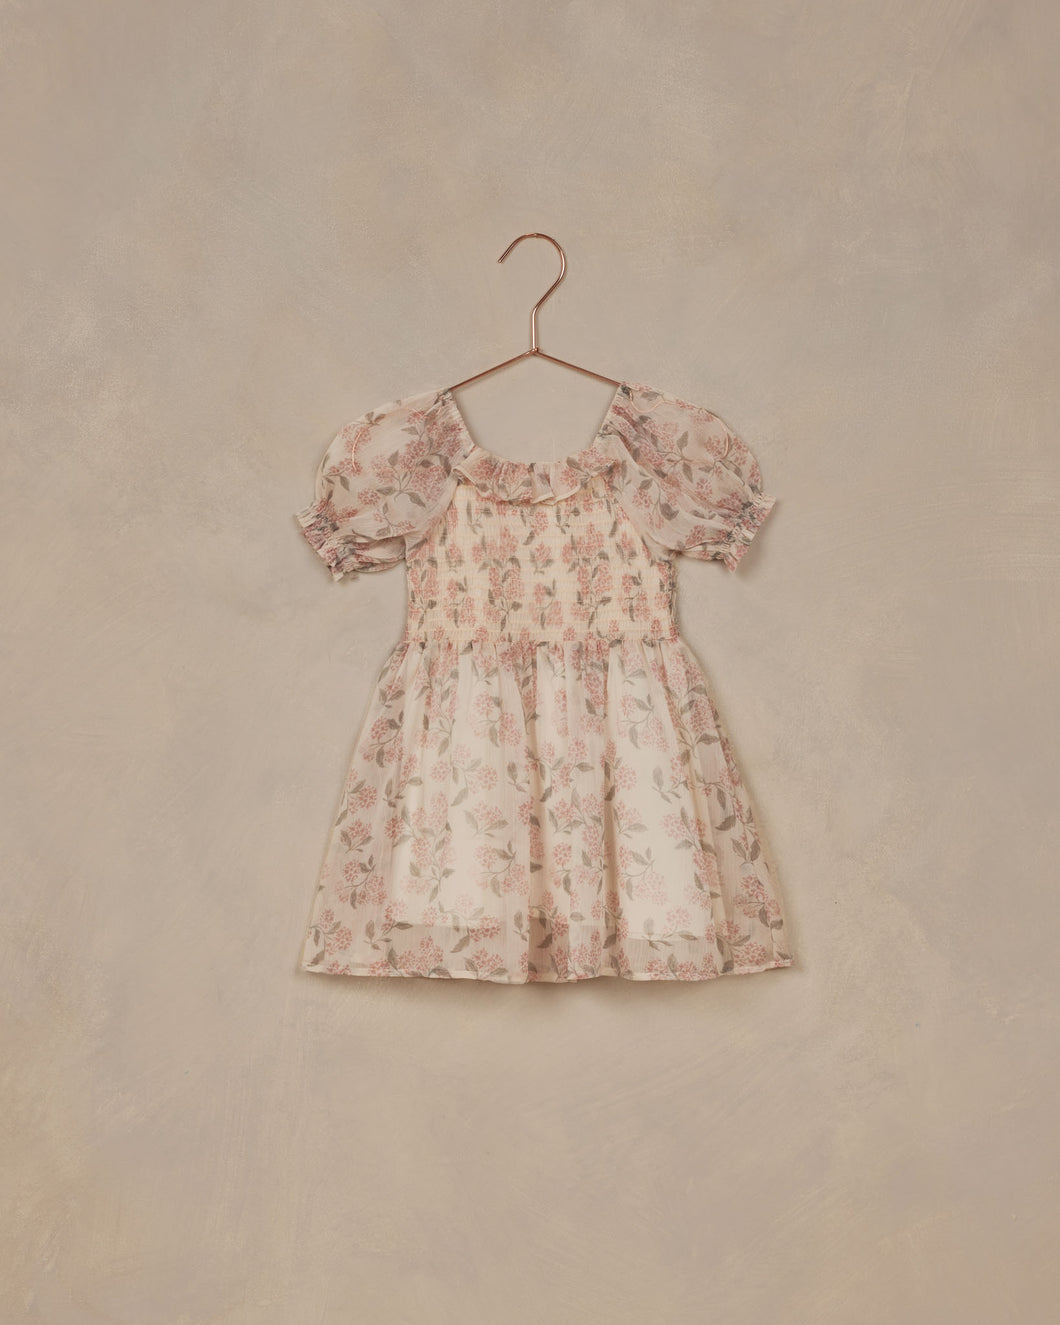 This vintage-inspired dress features a sweet chiffon, smocked bodice, and puff sleeves. The print is featuring a 'french hydrangea' all over print on an ivory base.